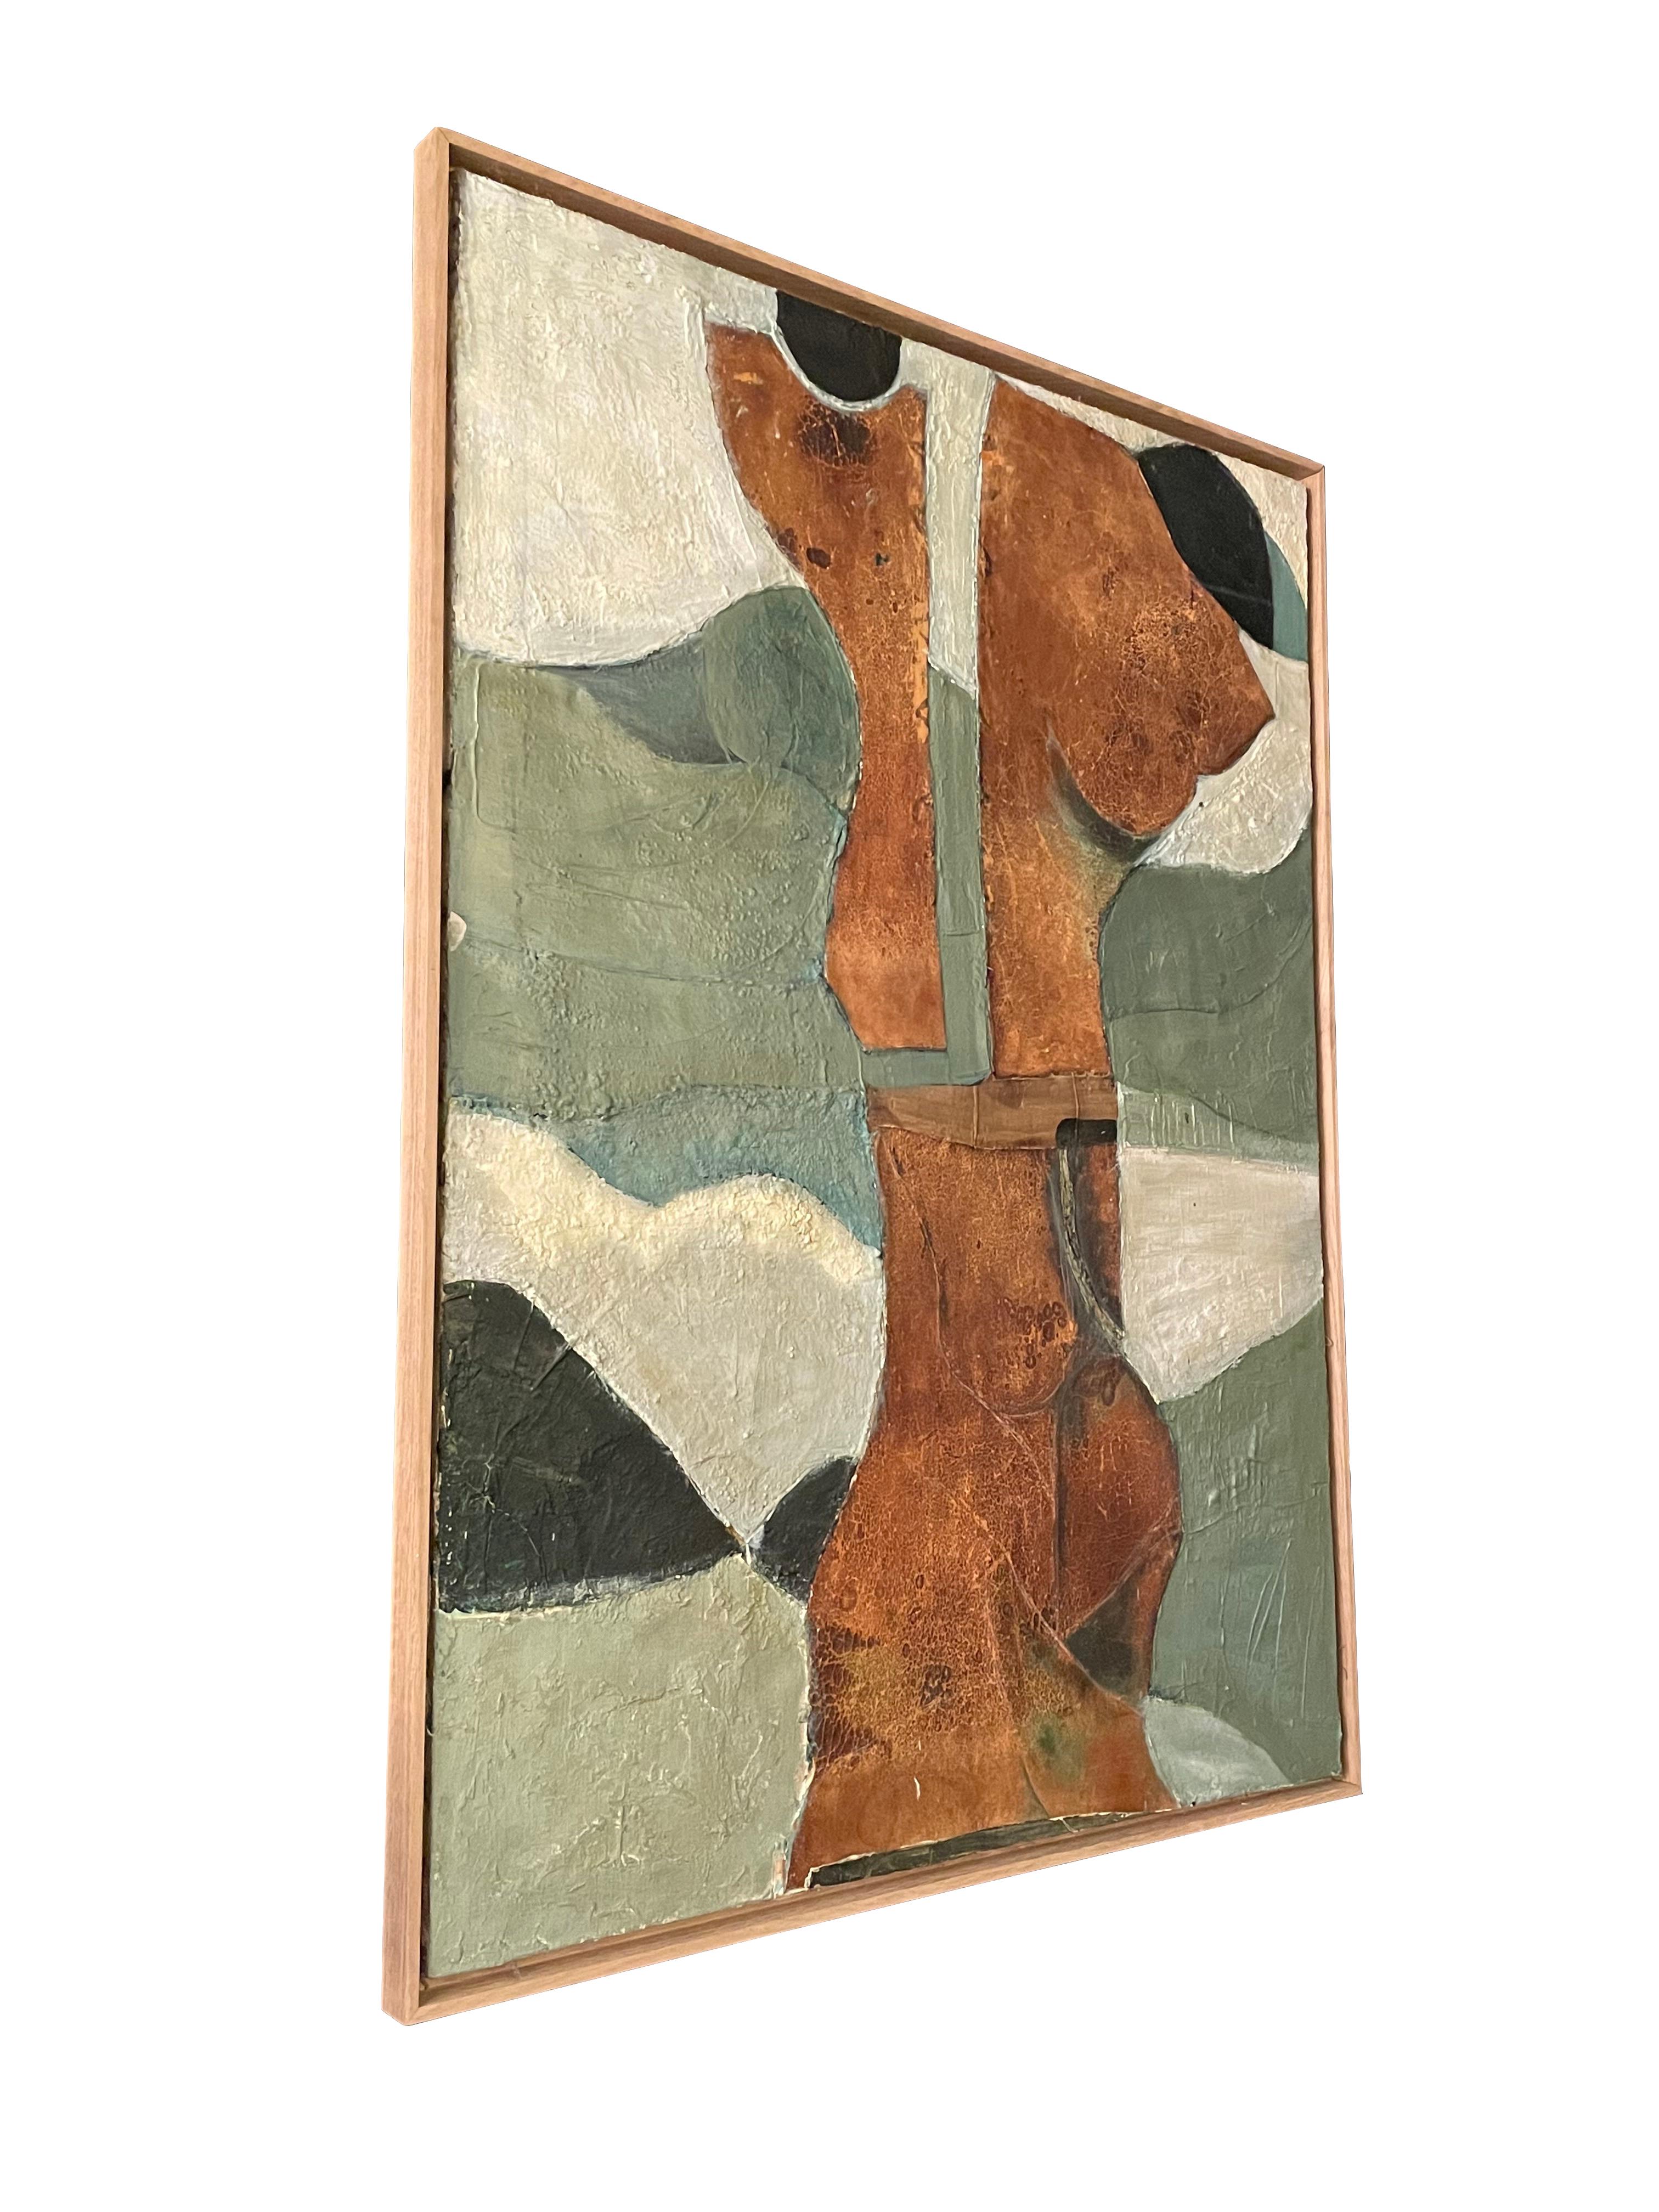 Contemporary painting by Spanish artist Santiago Castillo.
This large painting is created in oil and stucco on wood. The stucco and a combination of matte and gloss paint finish create an interesting textural effect.
Colors are rust and shades of